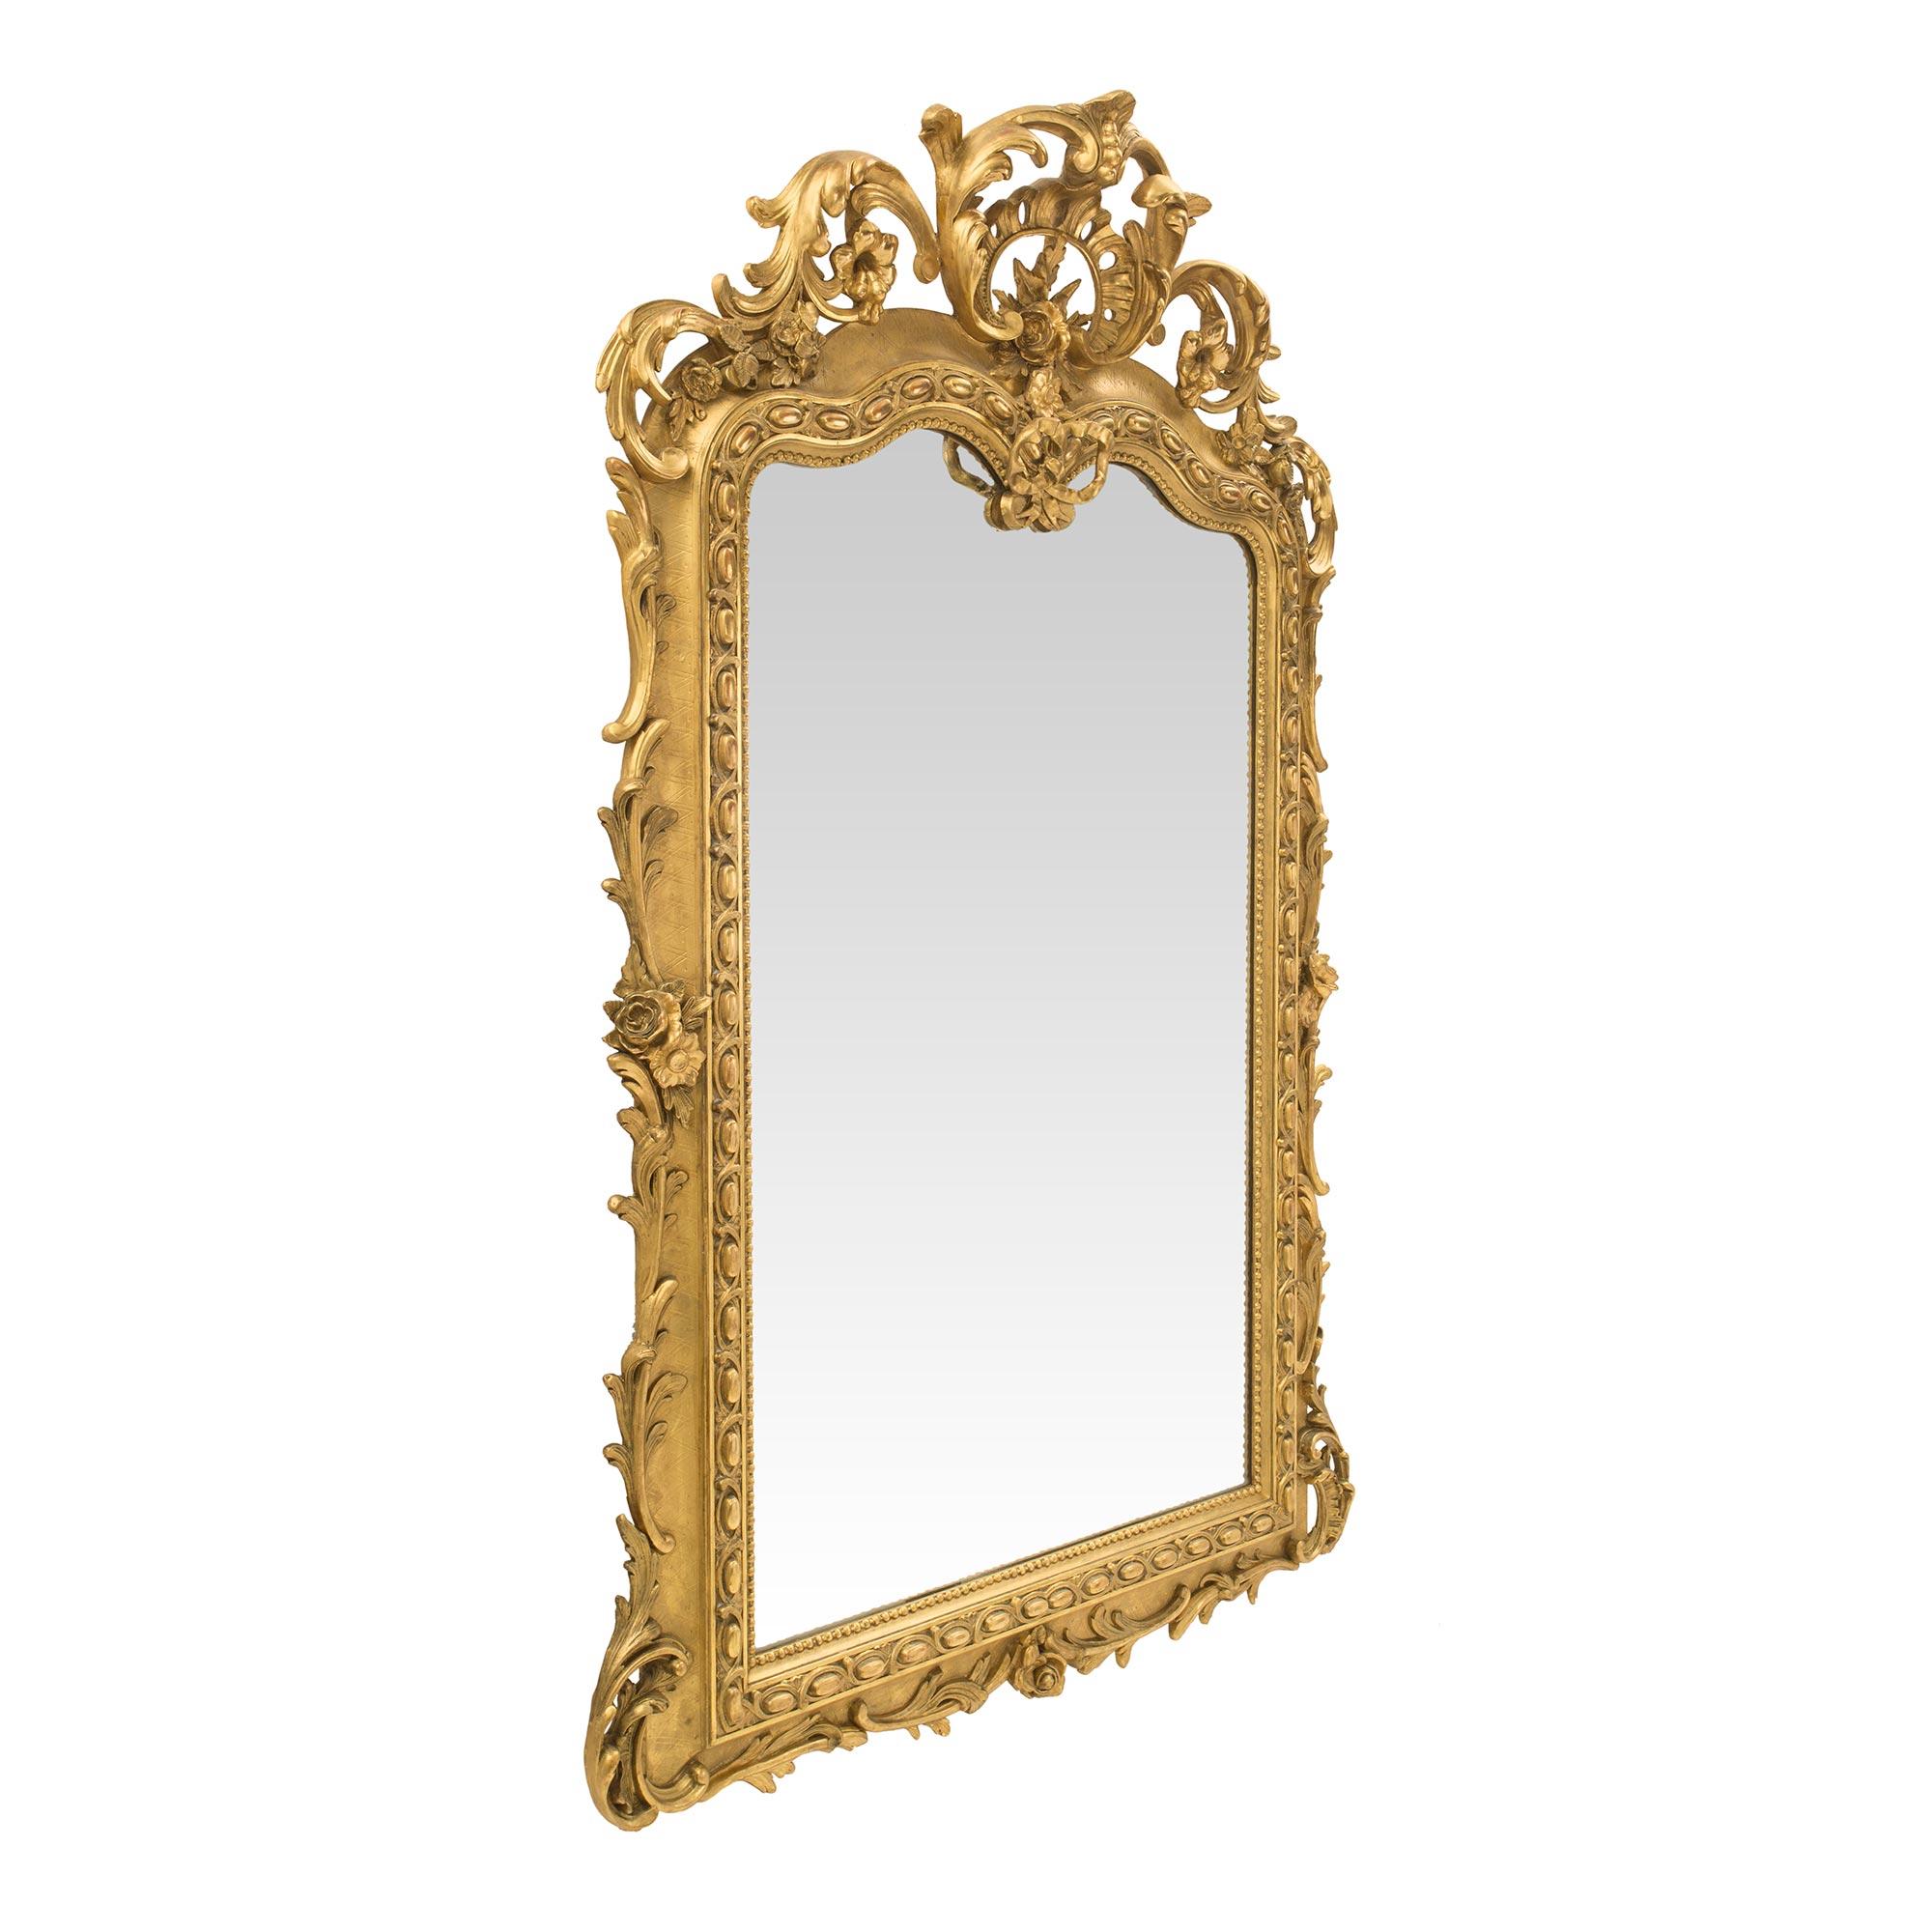 A most elegant French 19th century Regence st. giltwood mirror. The original mirror plate is framed within a beaded border and a beautiful pattern of burnished ovals within fine foliate interlocking movements. At the bottom and leading up the sides